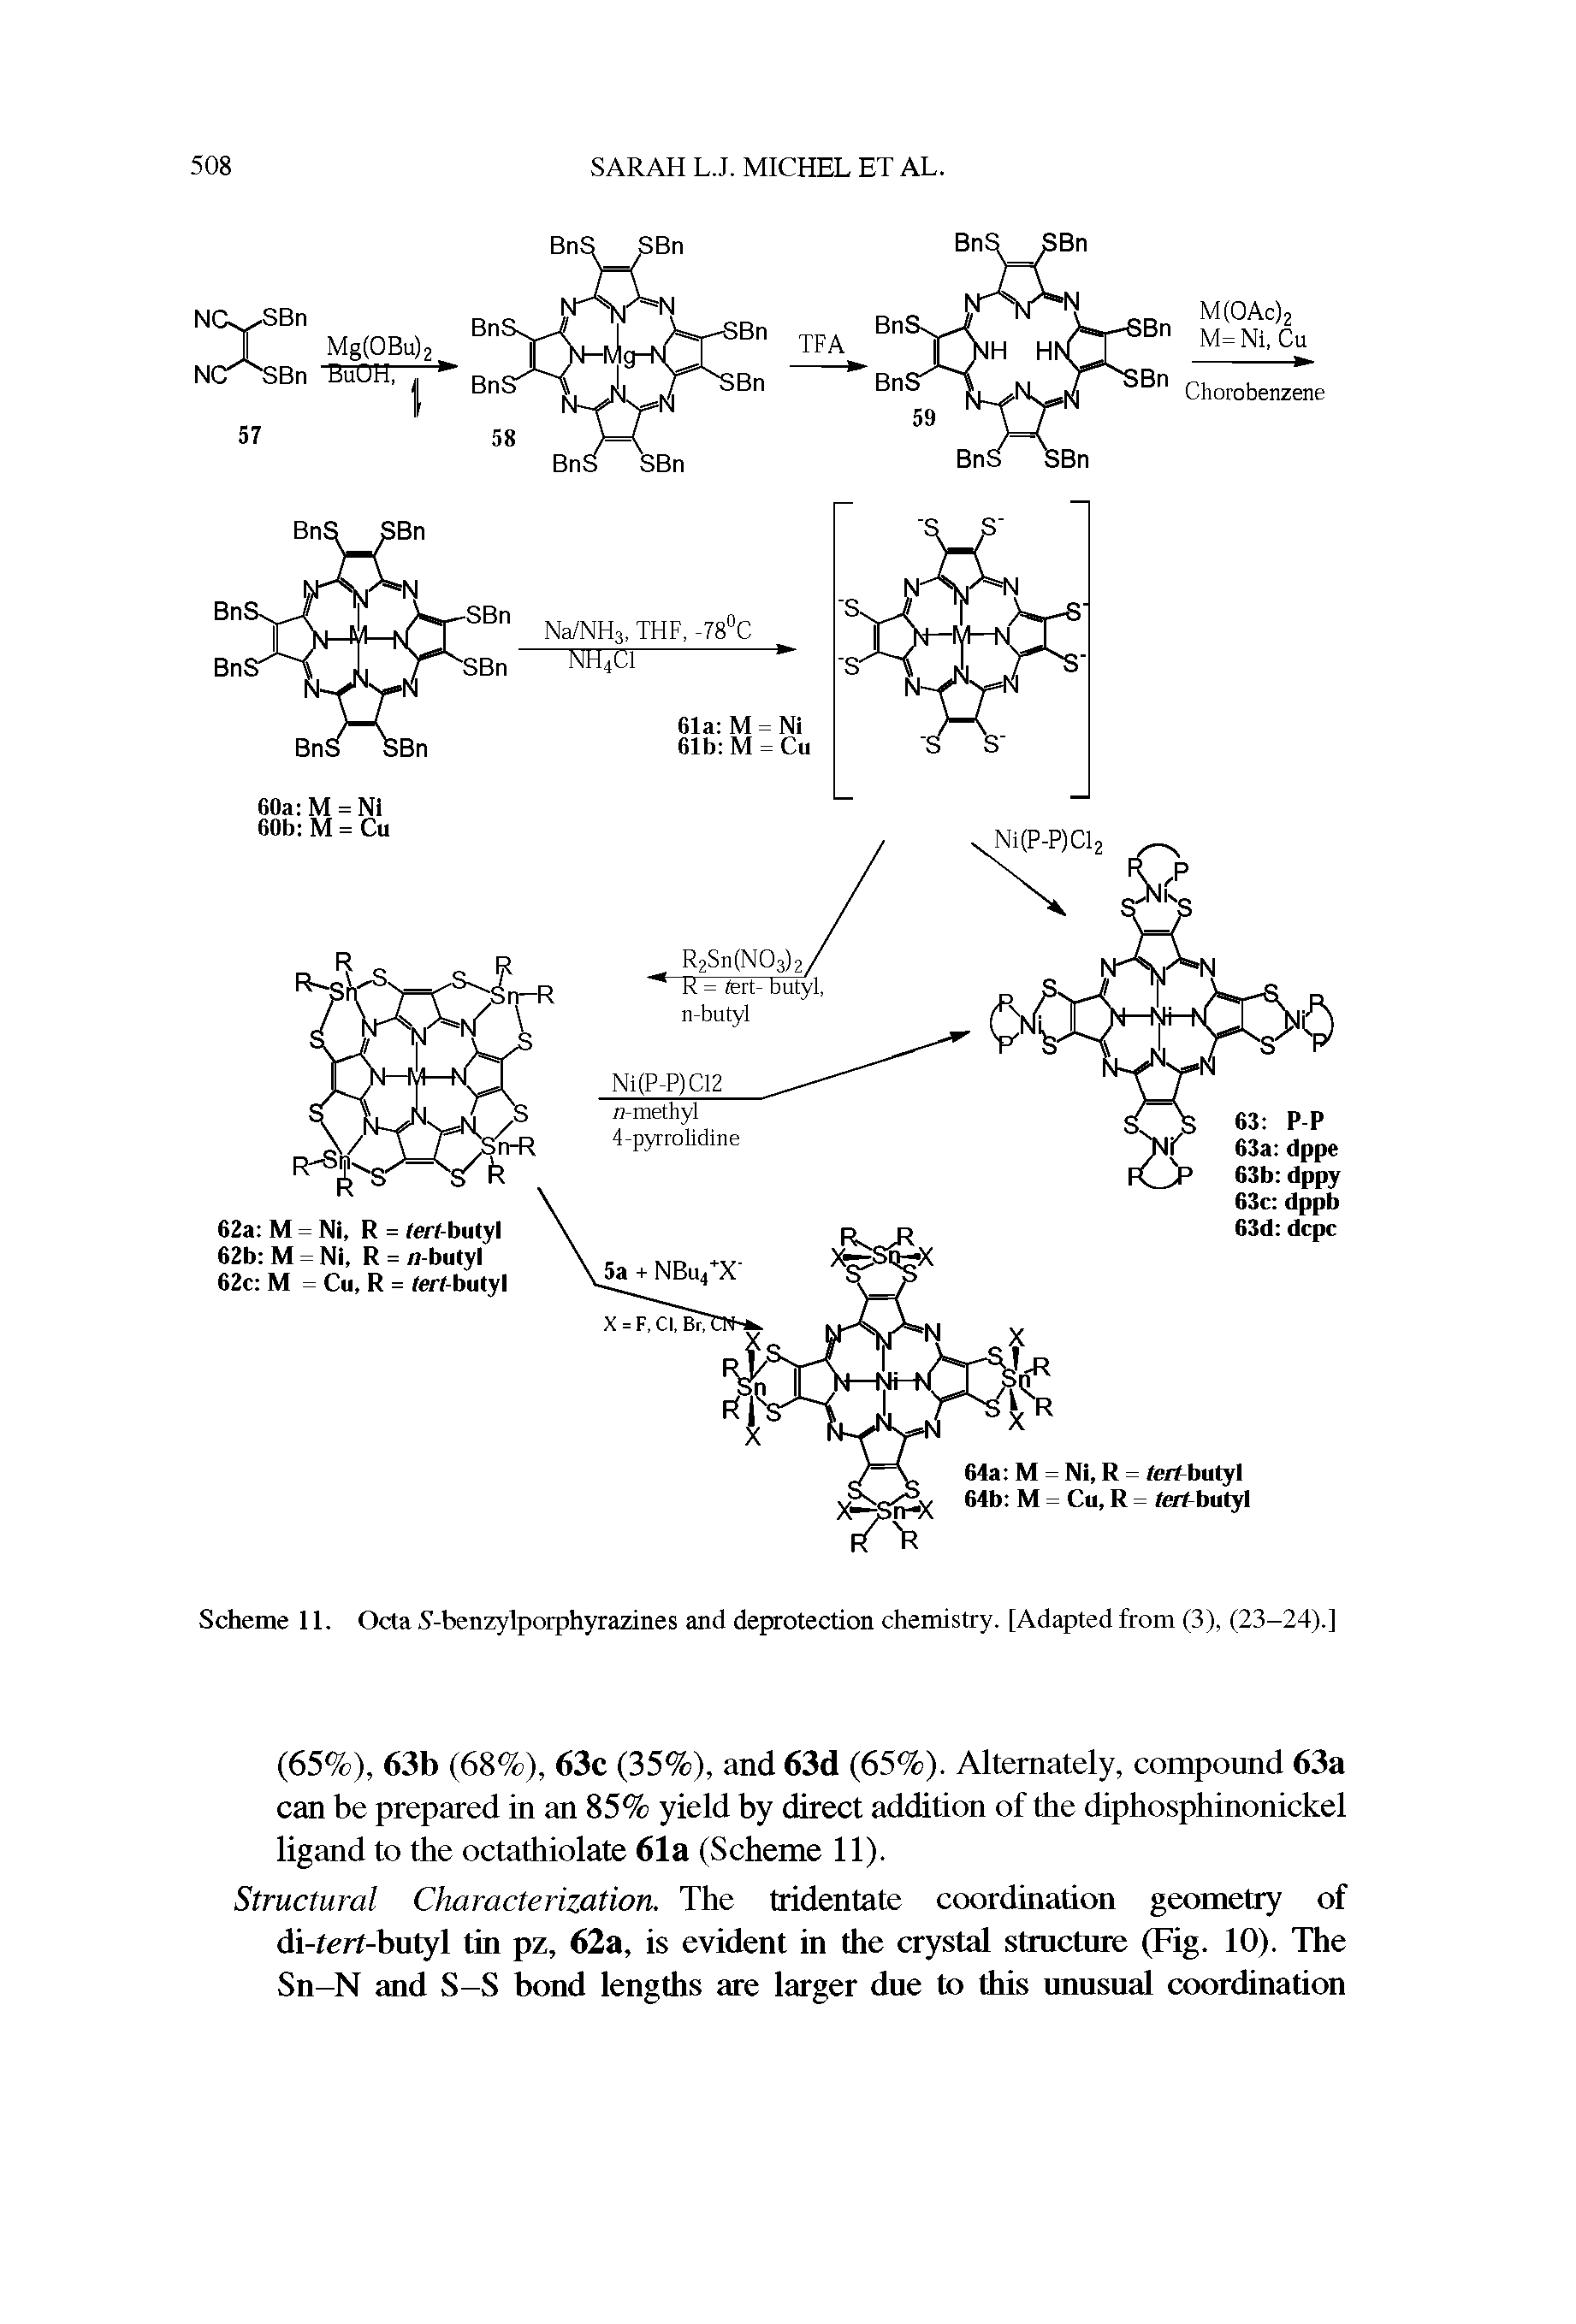 Scheme 11. Octa S-benzylporphyrazines and deprotection chemistry. [Adapted from (3), (23-24).]...